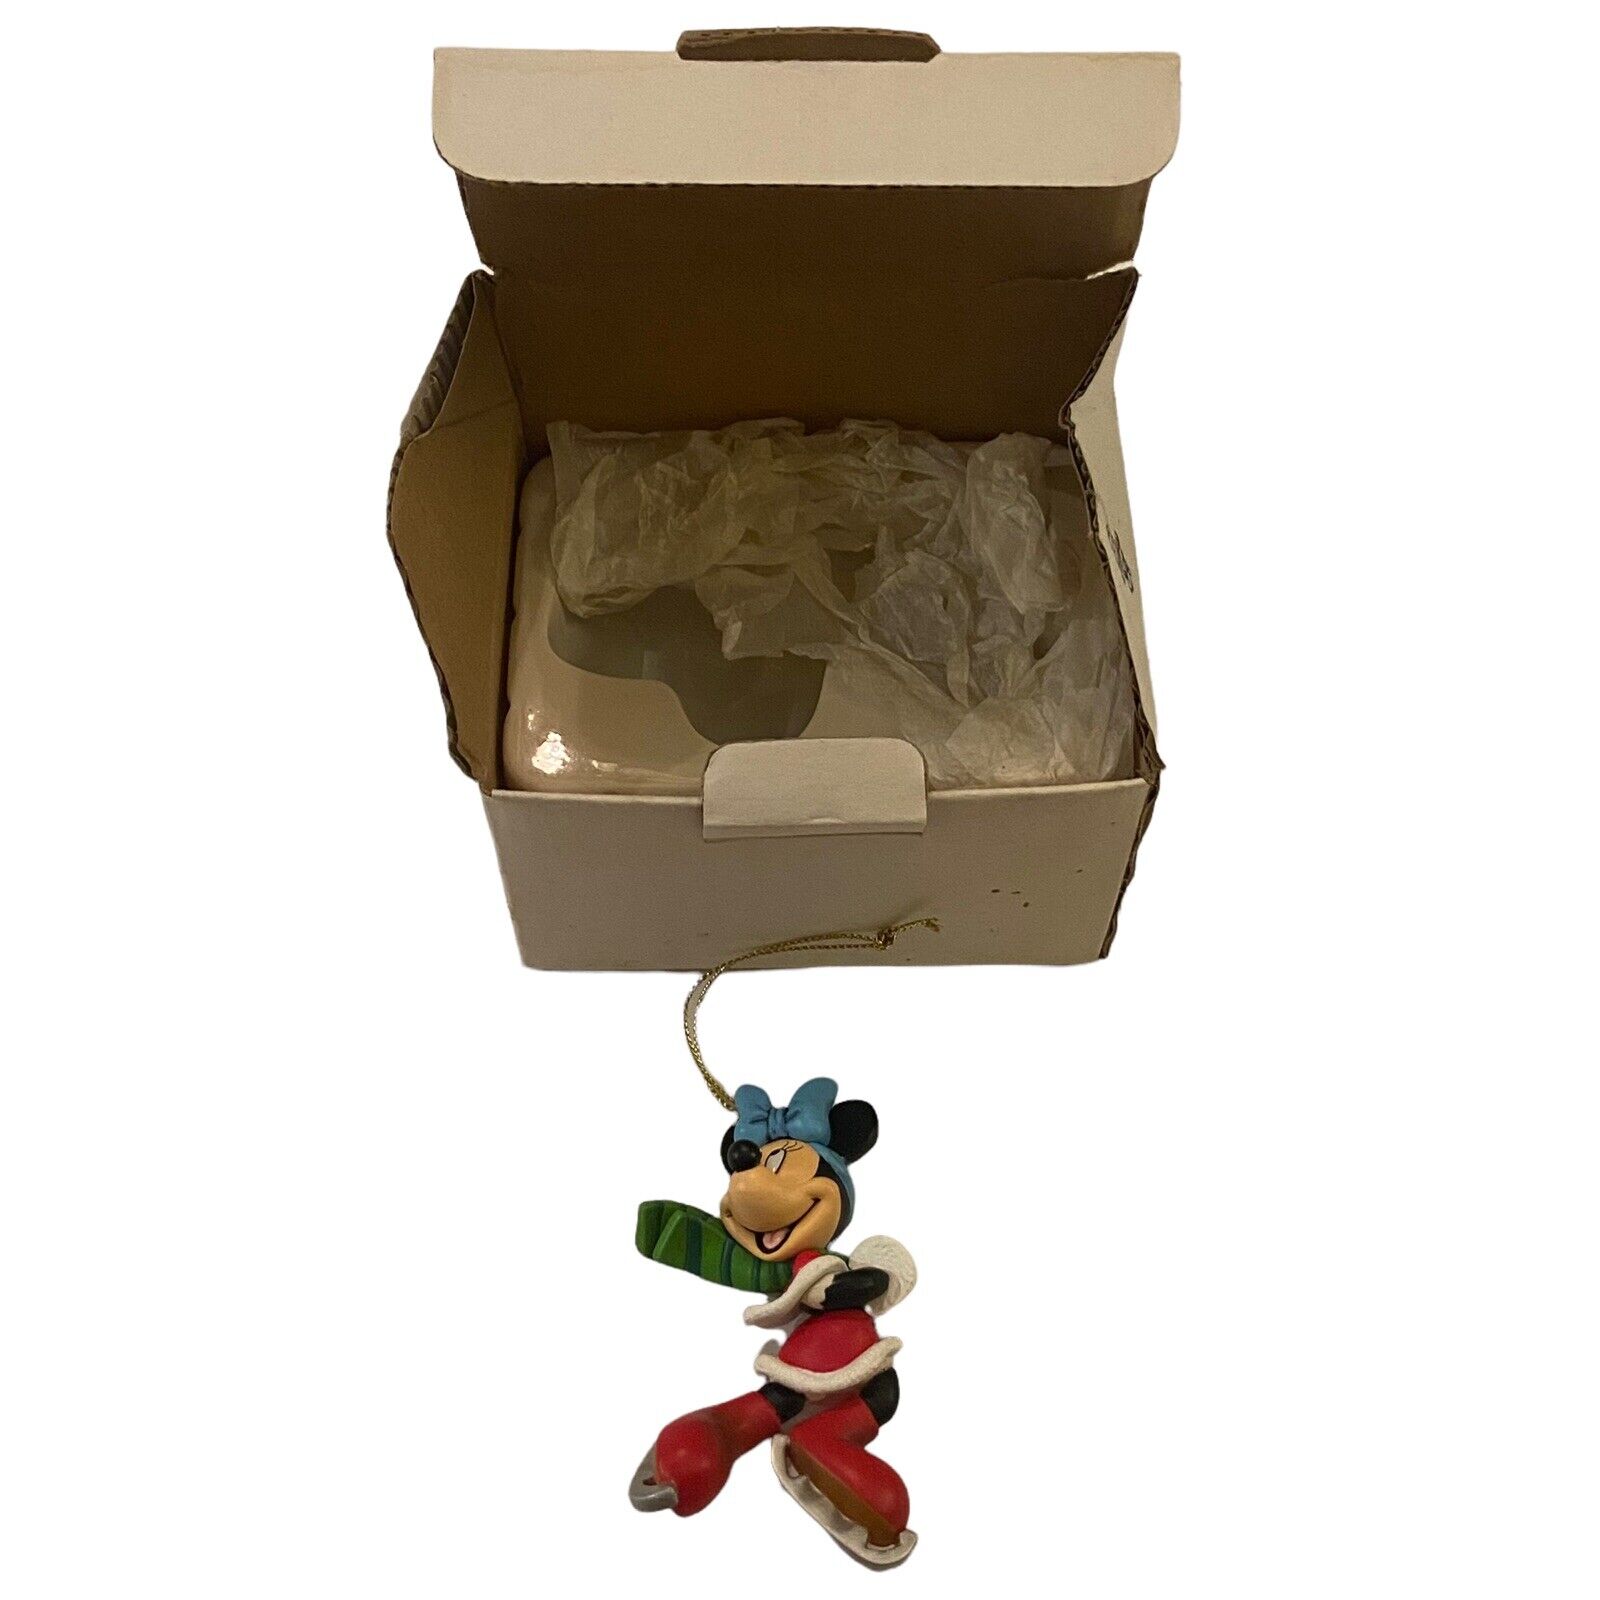 Disney Minnie Christmas Magic Collectible Ornament In Box Grolier #26231-104